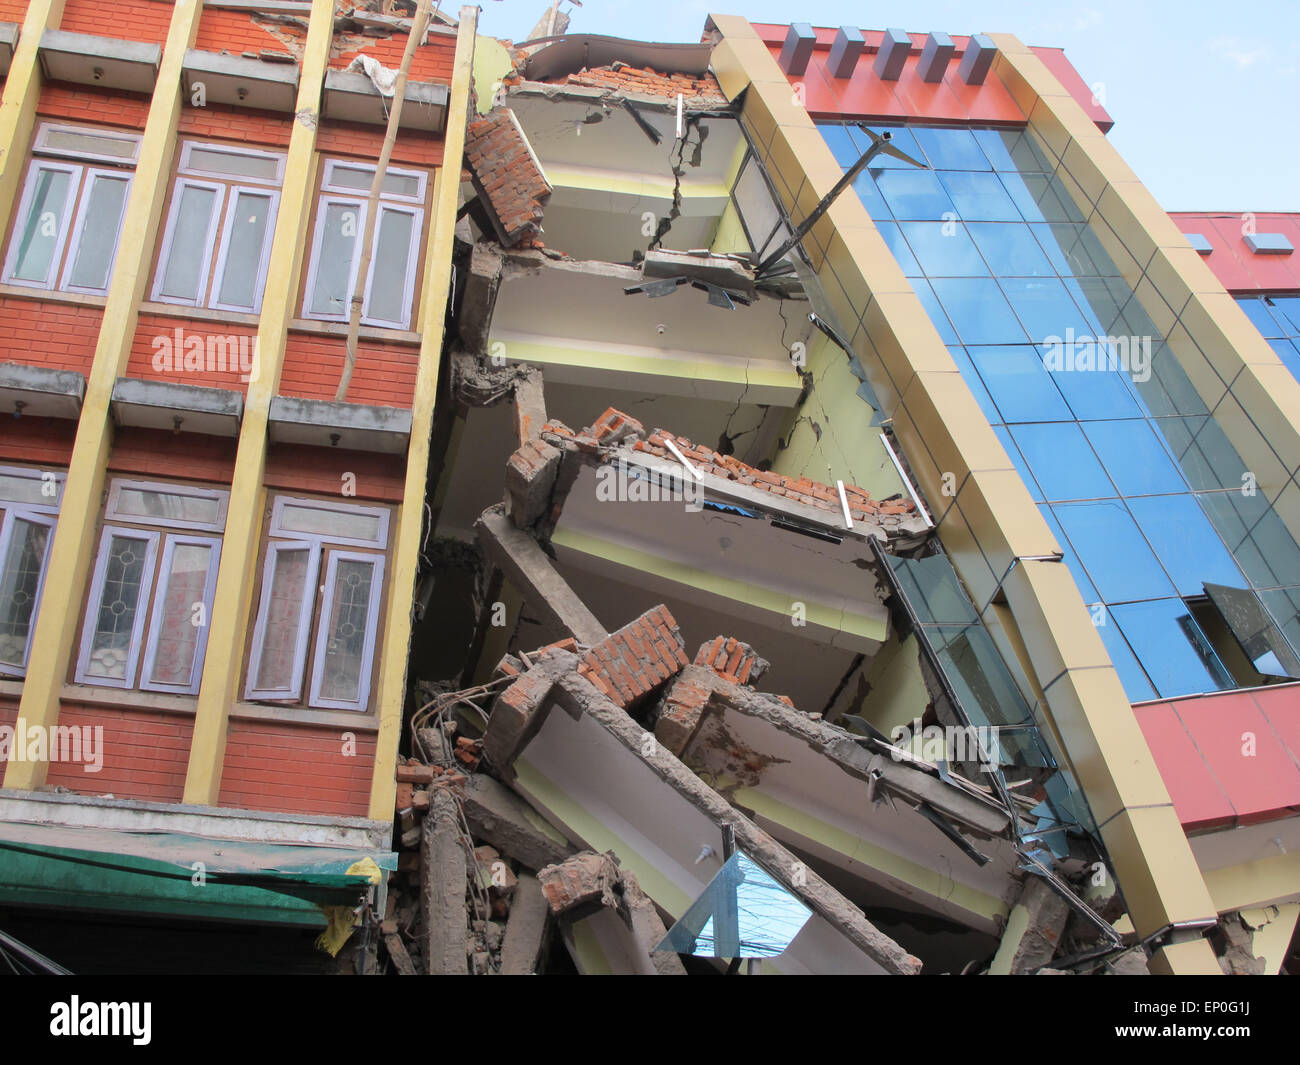 Kathmandu, Nepal. 12th May 2015. A fresh earthquake has occurred in Nepal. Photo shows damage situation today in Bus Park area Kathmandu Nepal. Stock Photo